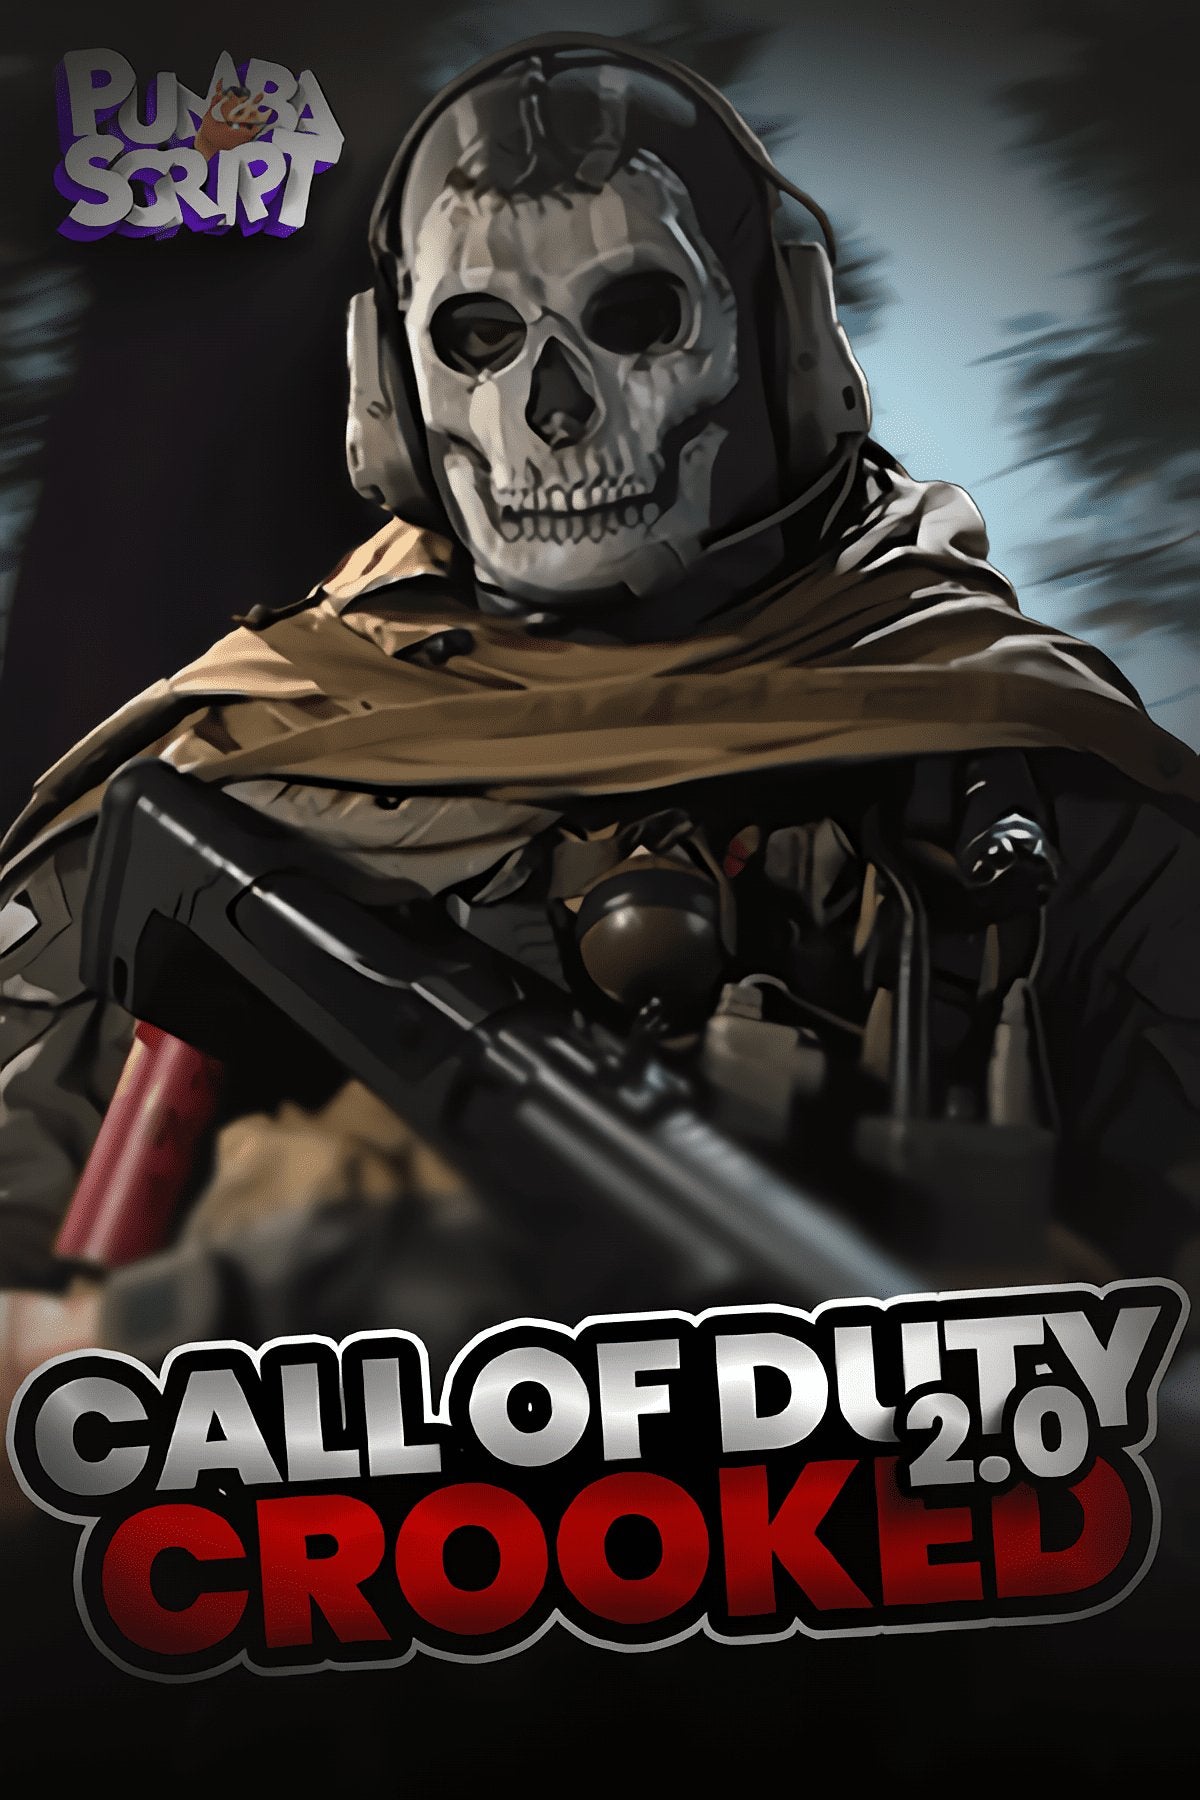 CALL OF DUTY 3.0 &amp; MW3 CROOKED